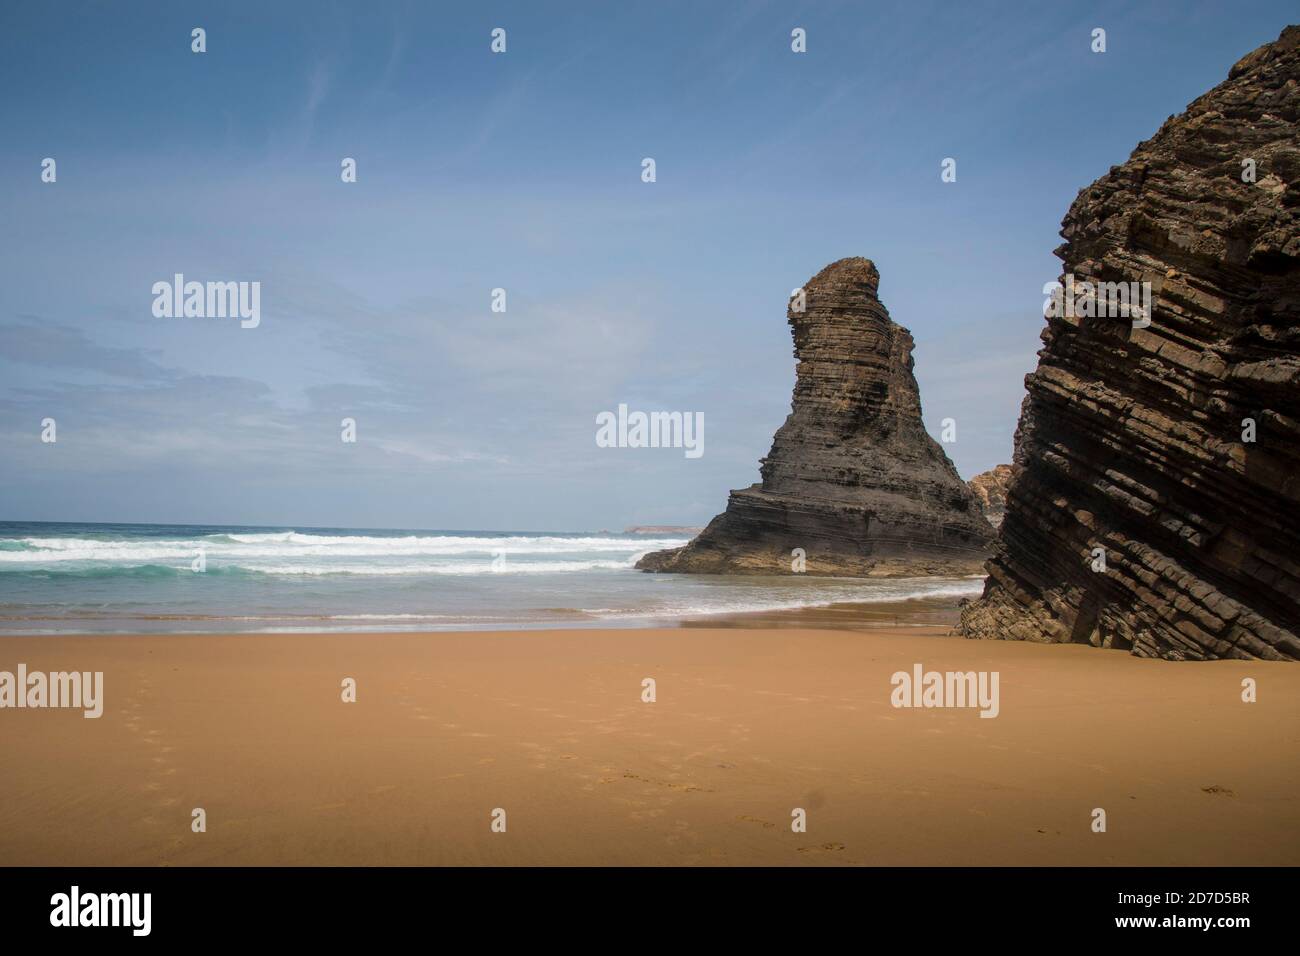 Big and dark schist rock formations standing on beach shore, on a sunny day with clear blue sky Stock Photo